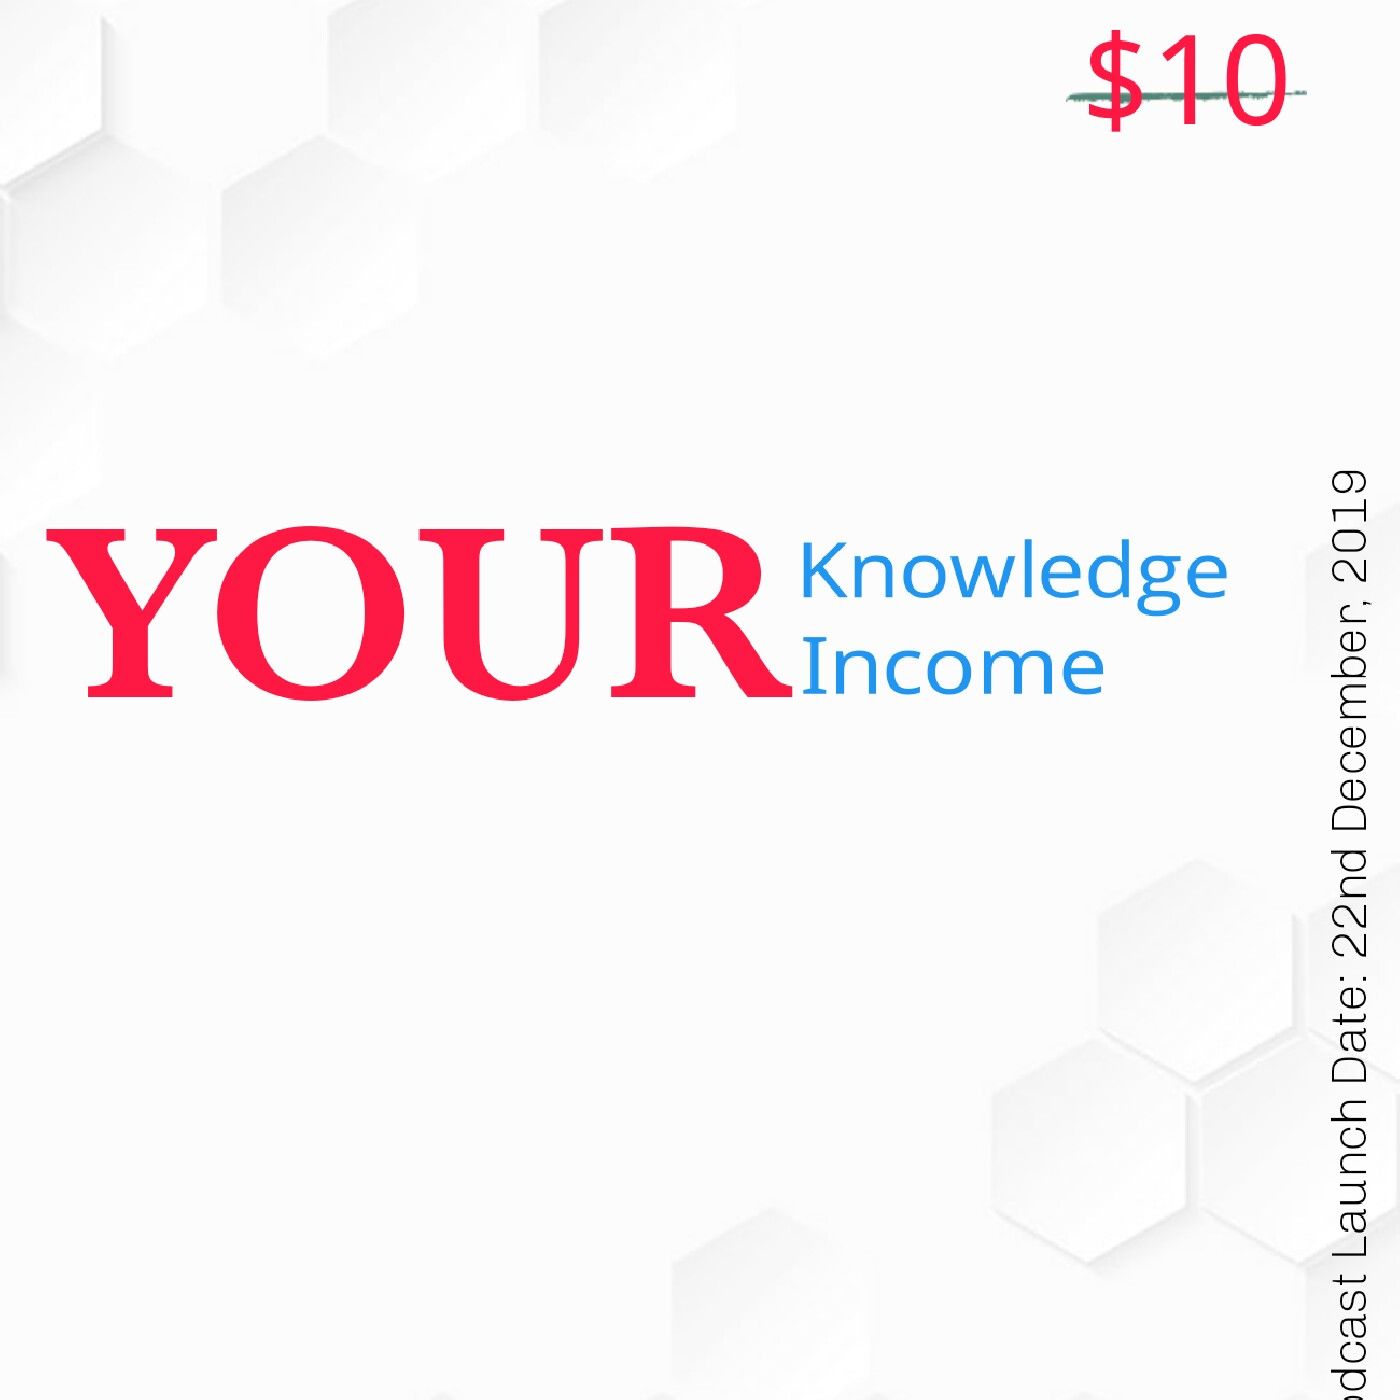 Episode 5 (Part 1) - Your Knowledge, Your Income